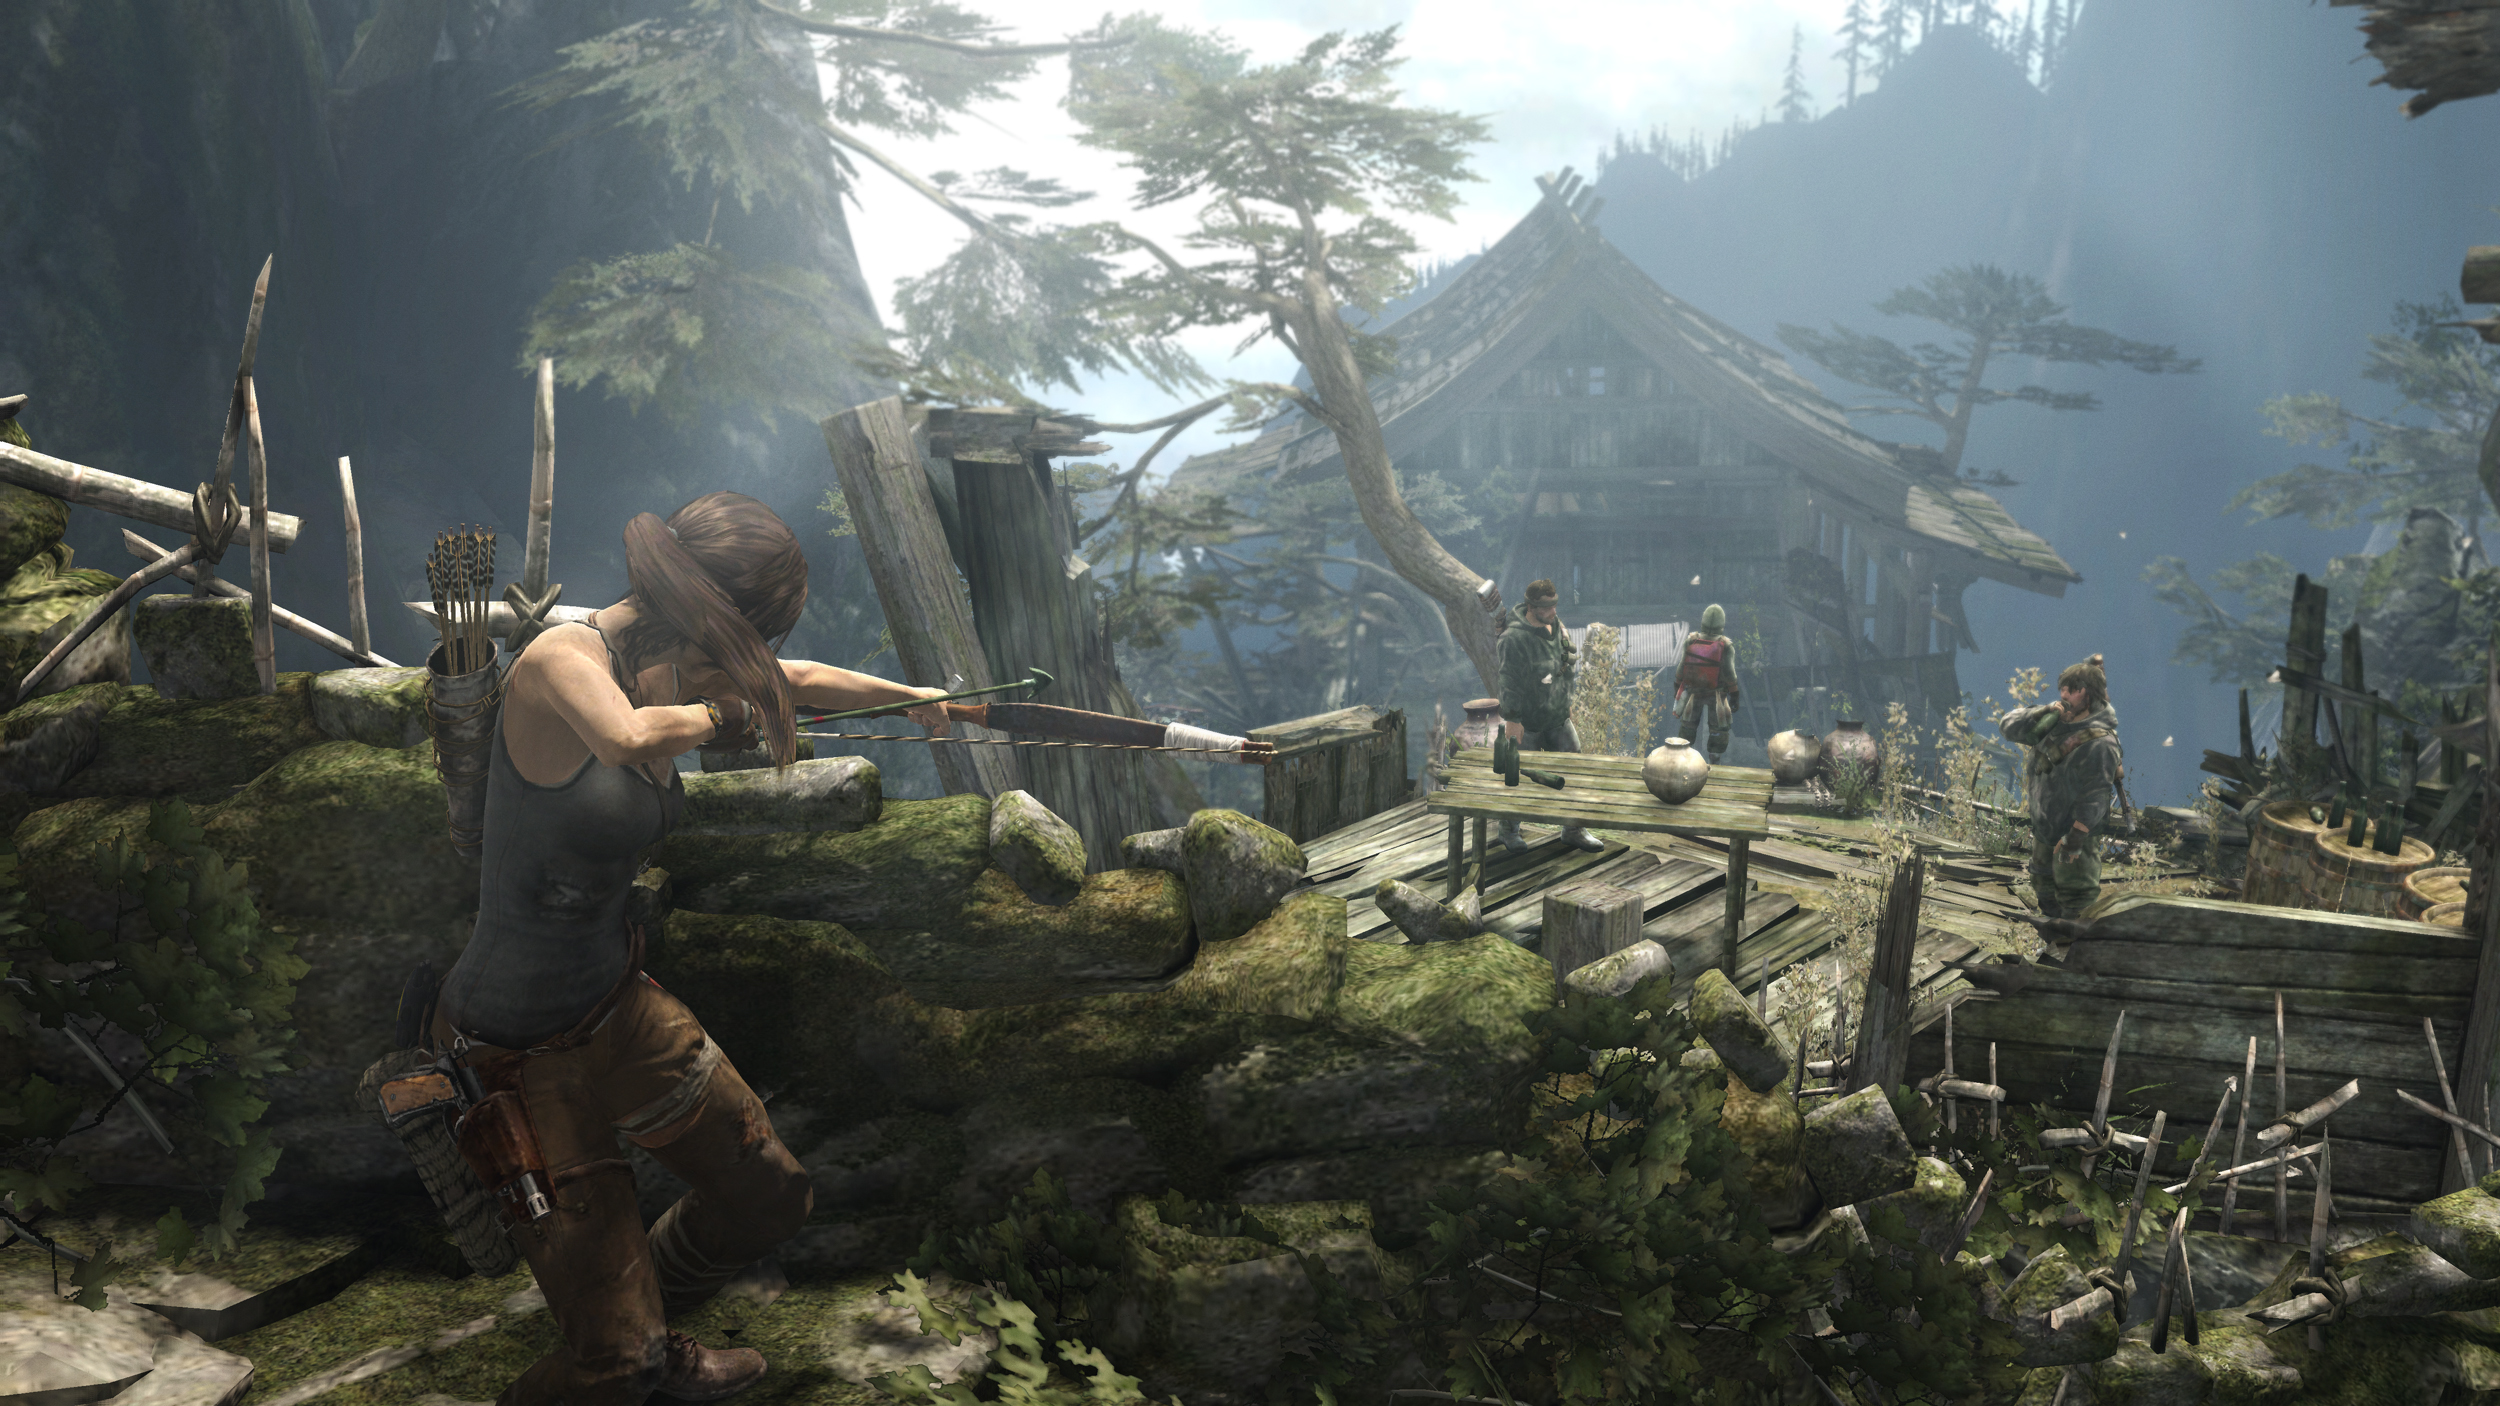 Tomb Raider Remastered: How to get 10% discount on pre-order